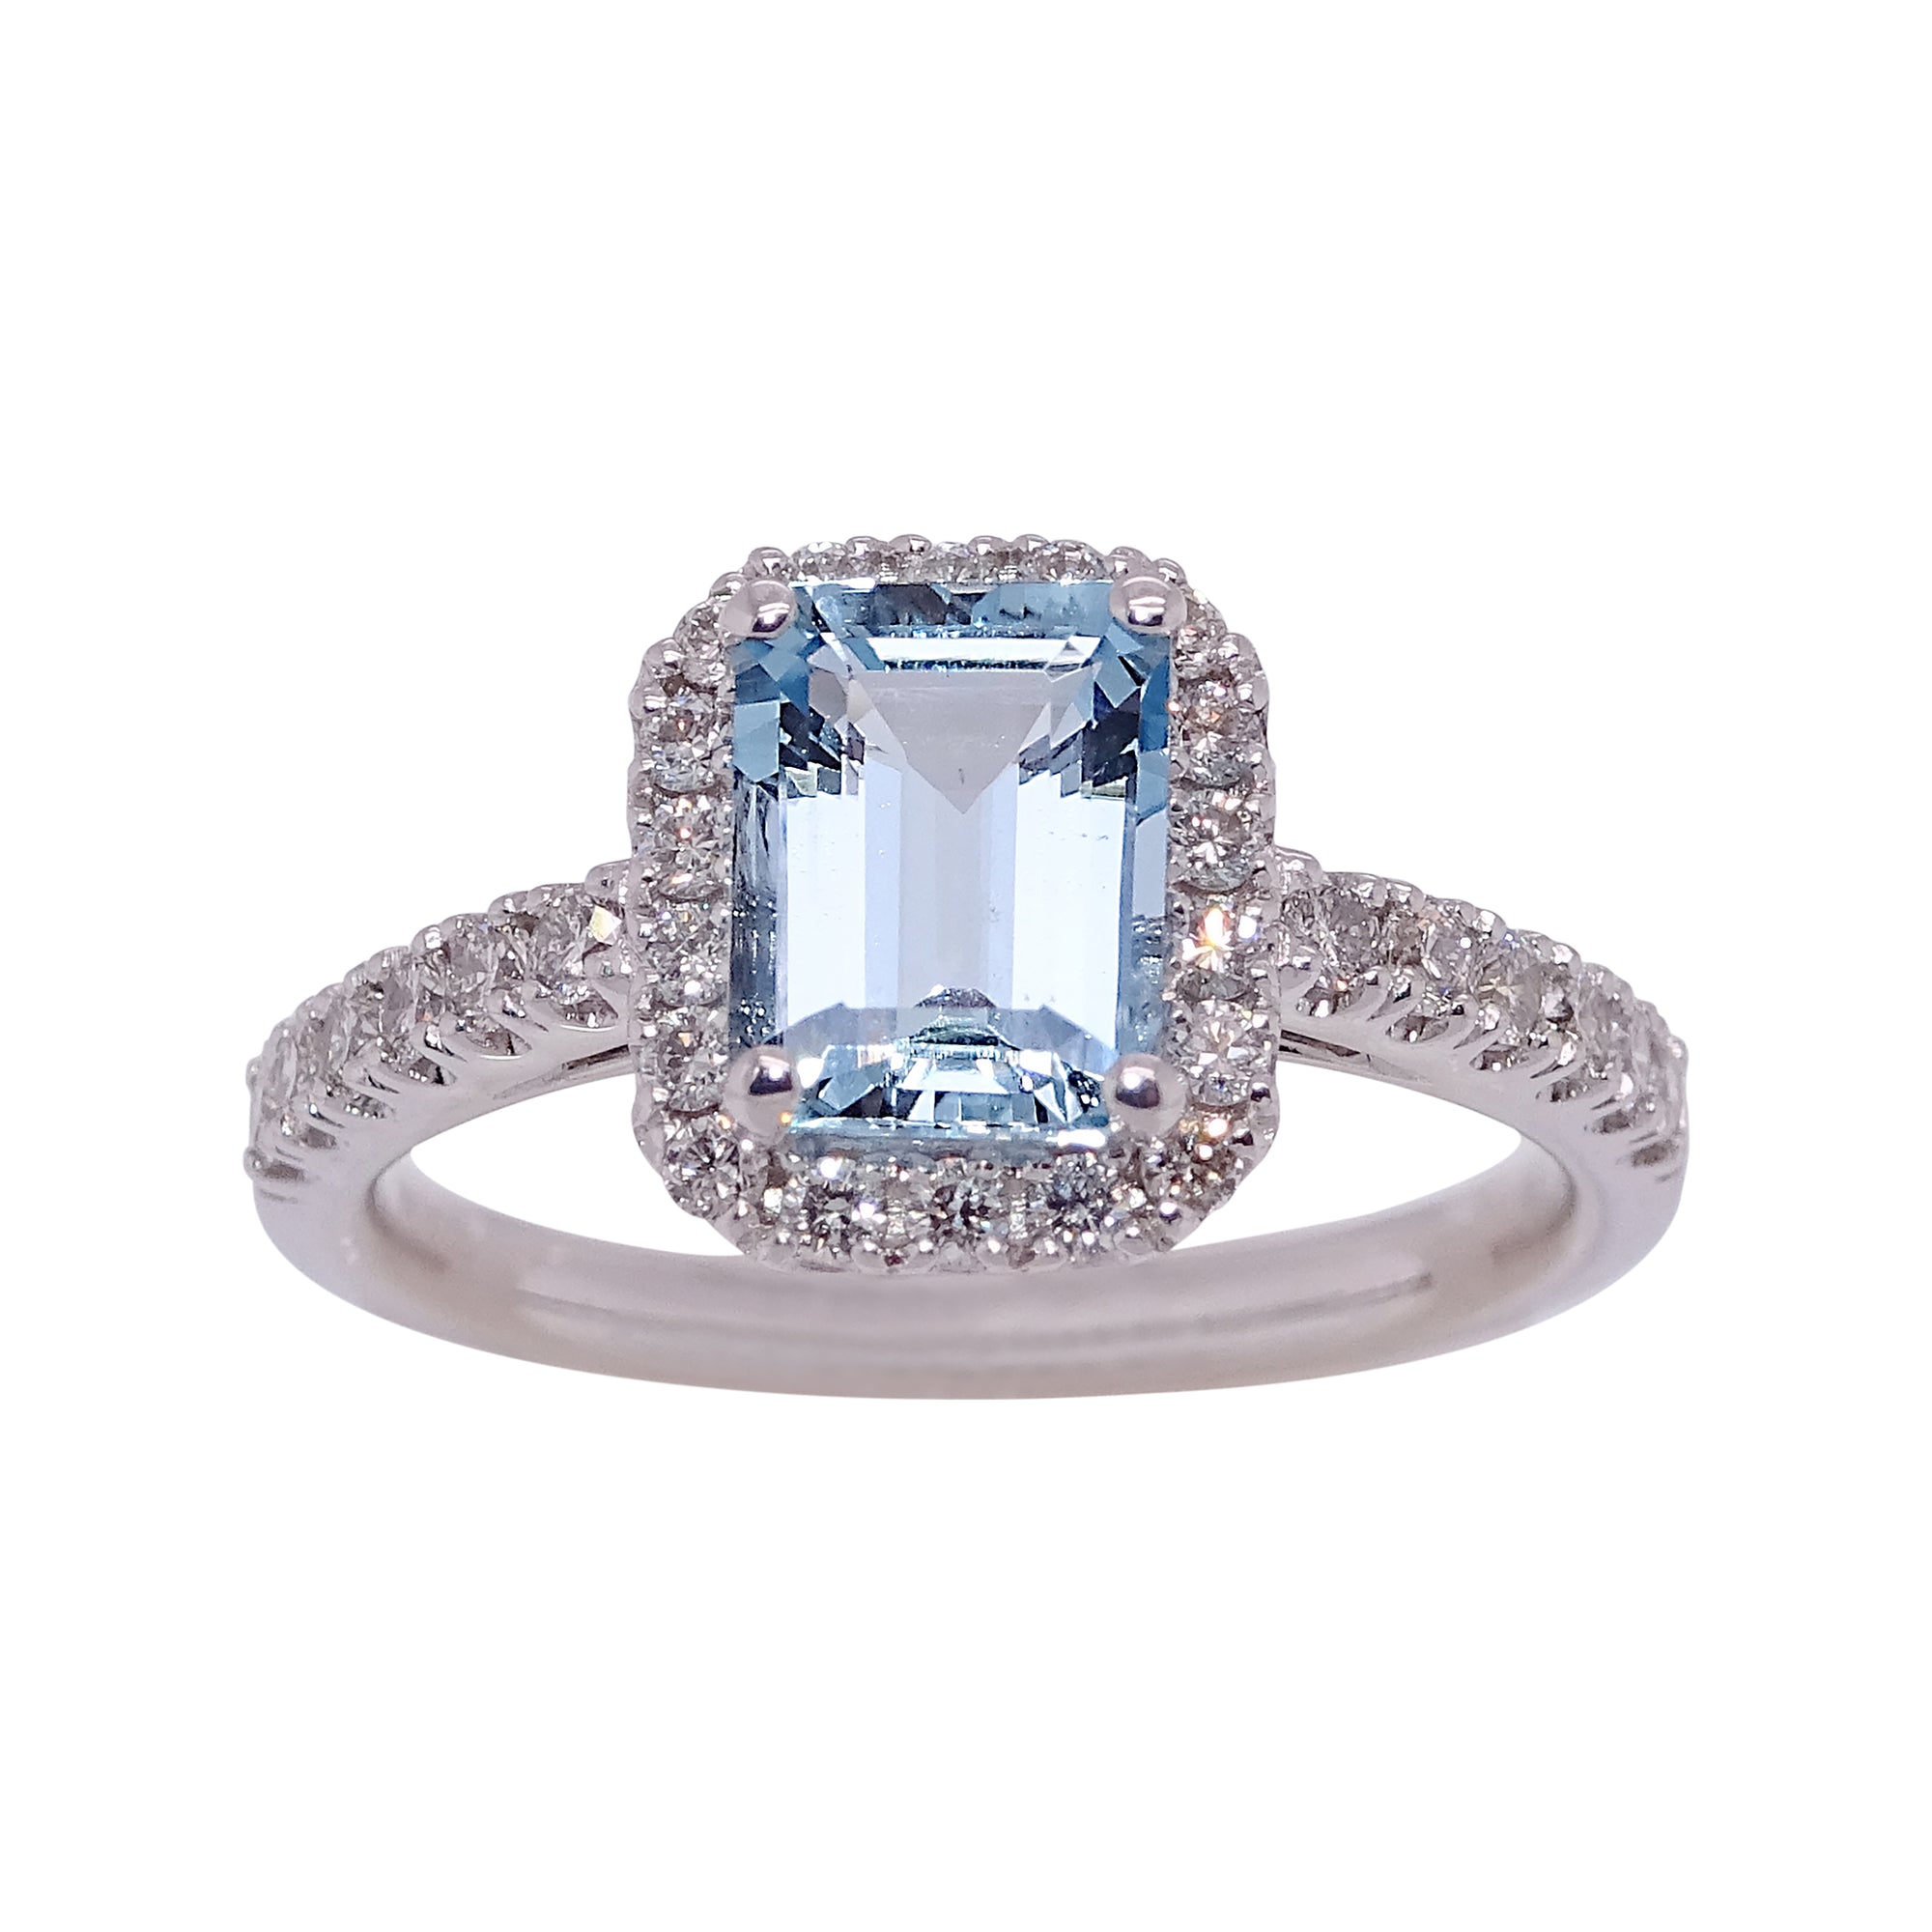 18ct white gold 1.48ct octagonal cut aquamarine ( 8.09*6.10*4.04mm) & diamond cluster ring with diamond shoulders 0.50ct Size O